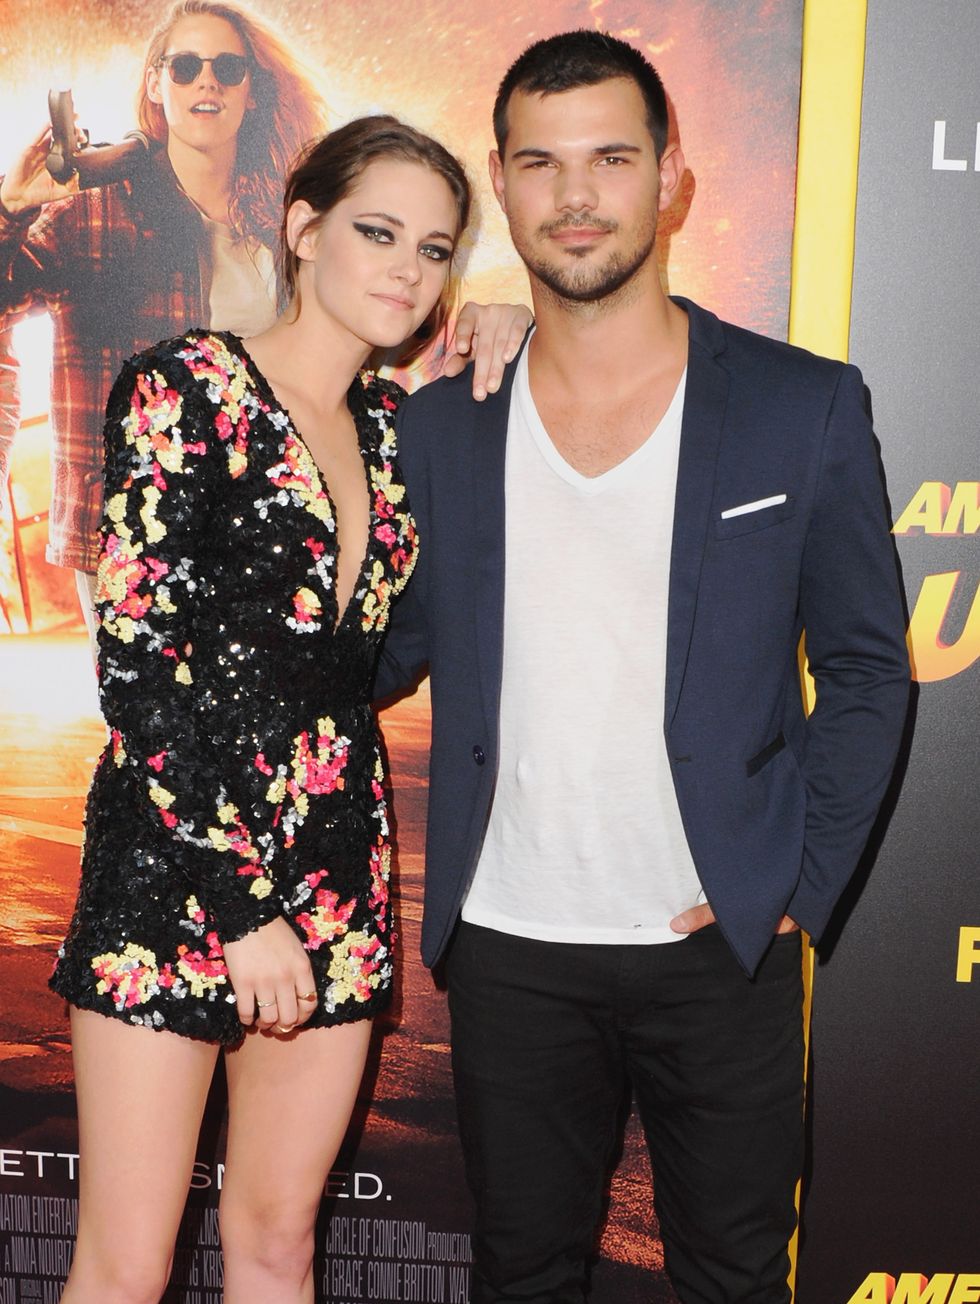 Kristen Stewart and Taylor Lautner at the premiere of American Ultra